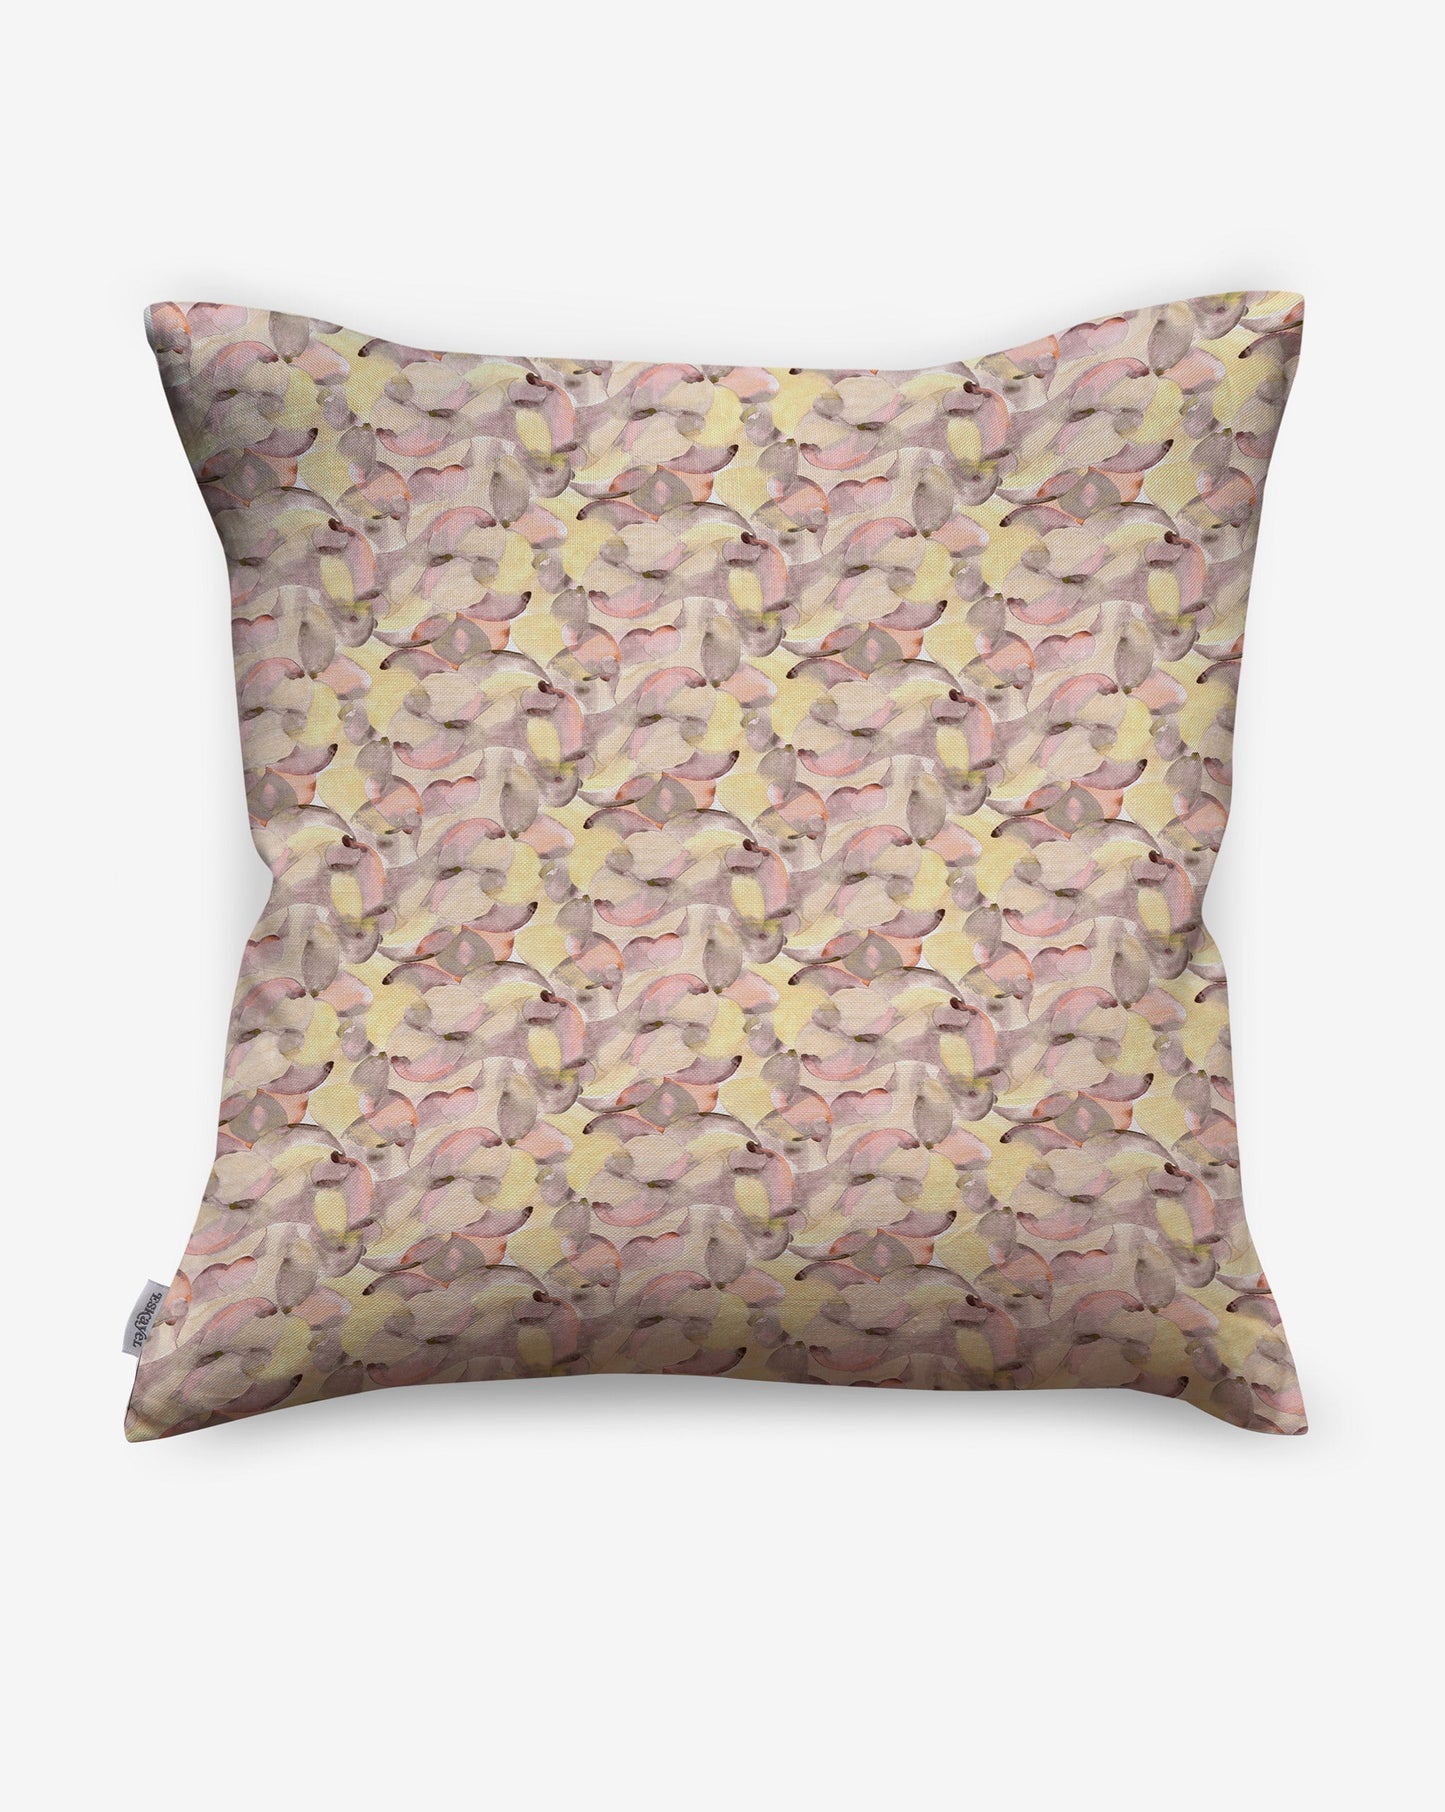 Eskayel pillows in Orbs in Rhubarb offer accents of modern pastels and neutrals.